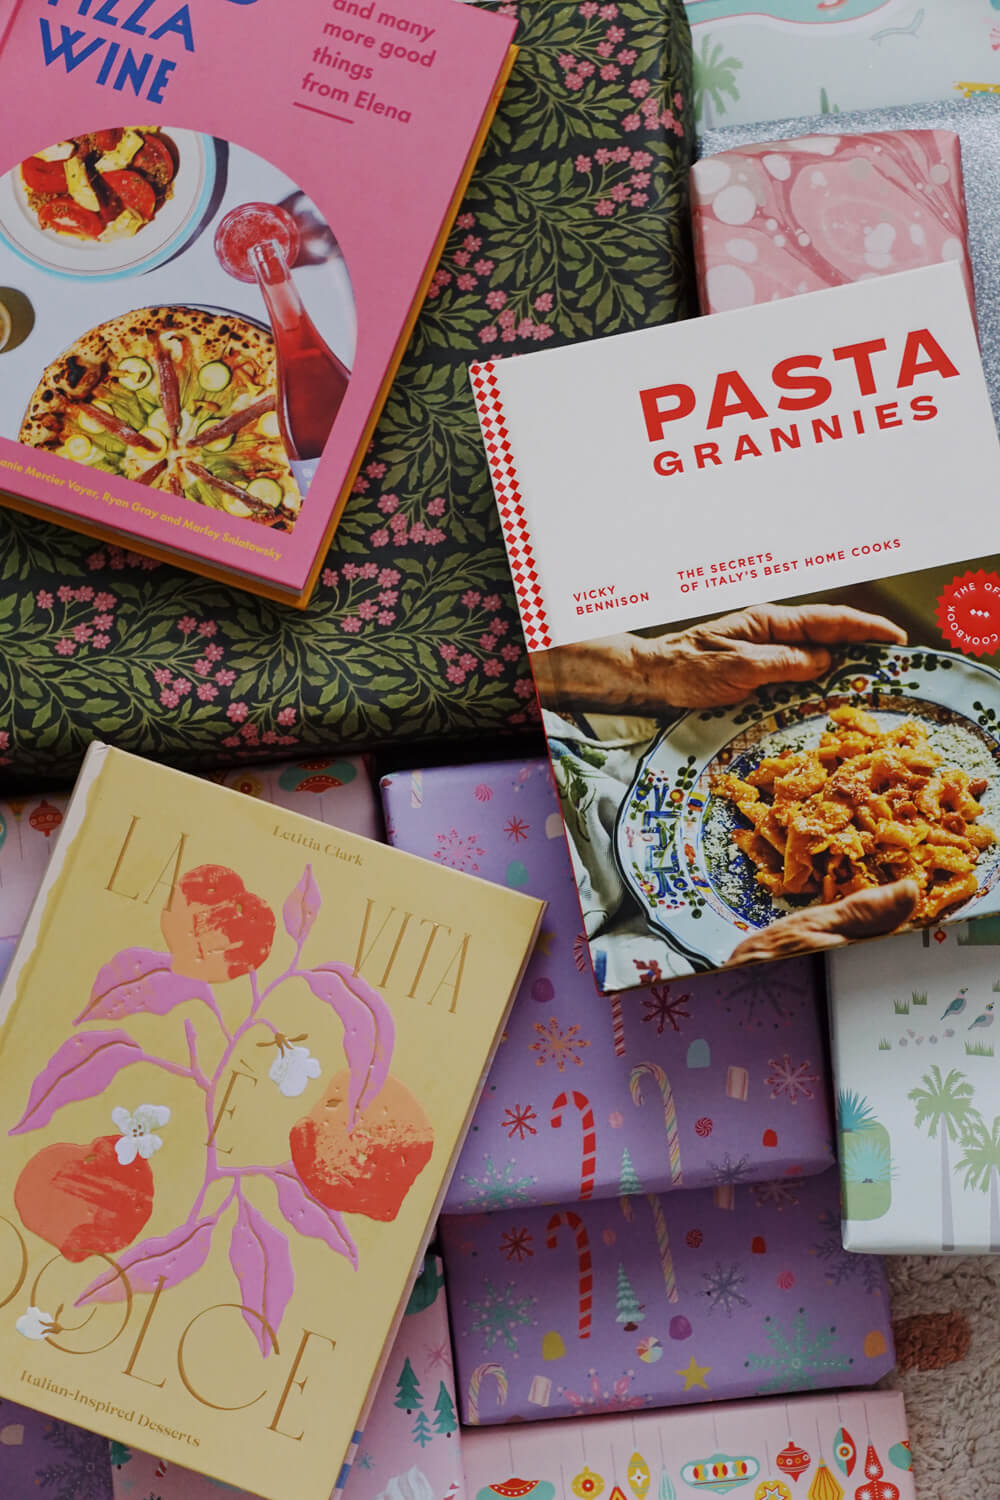 wallflower shop books pasta grannies with pretty christmas gift wrap